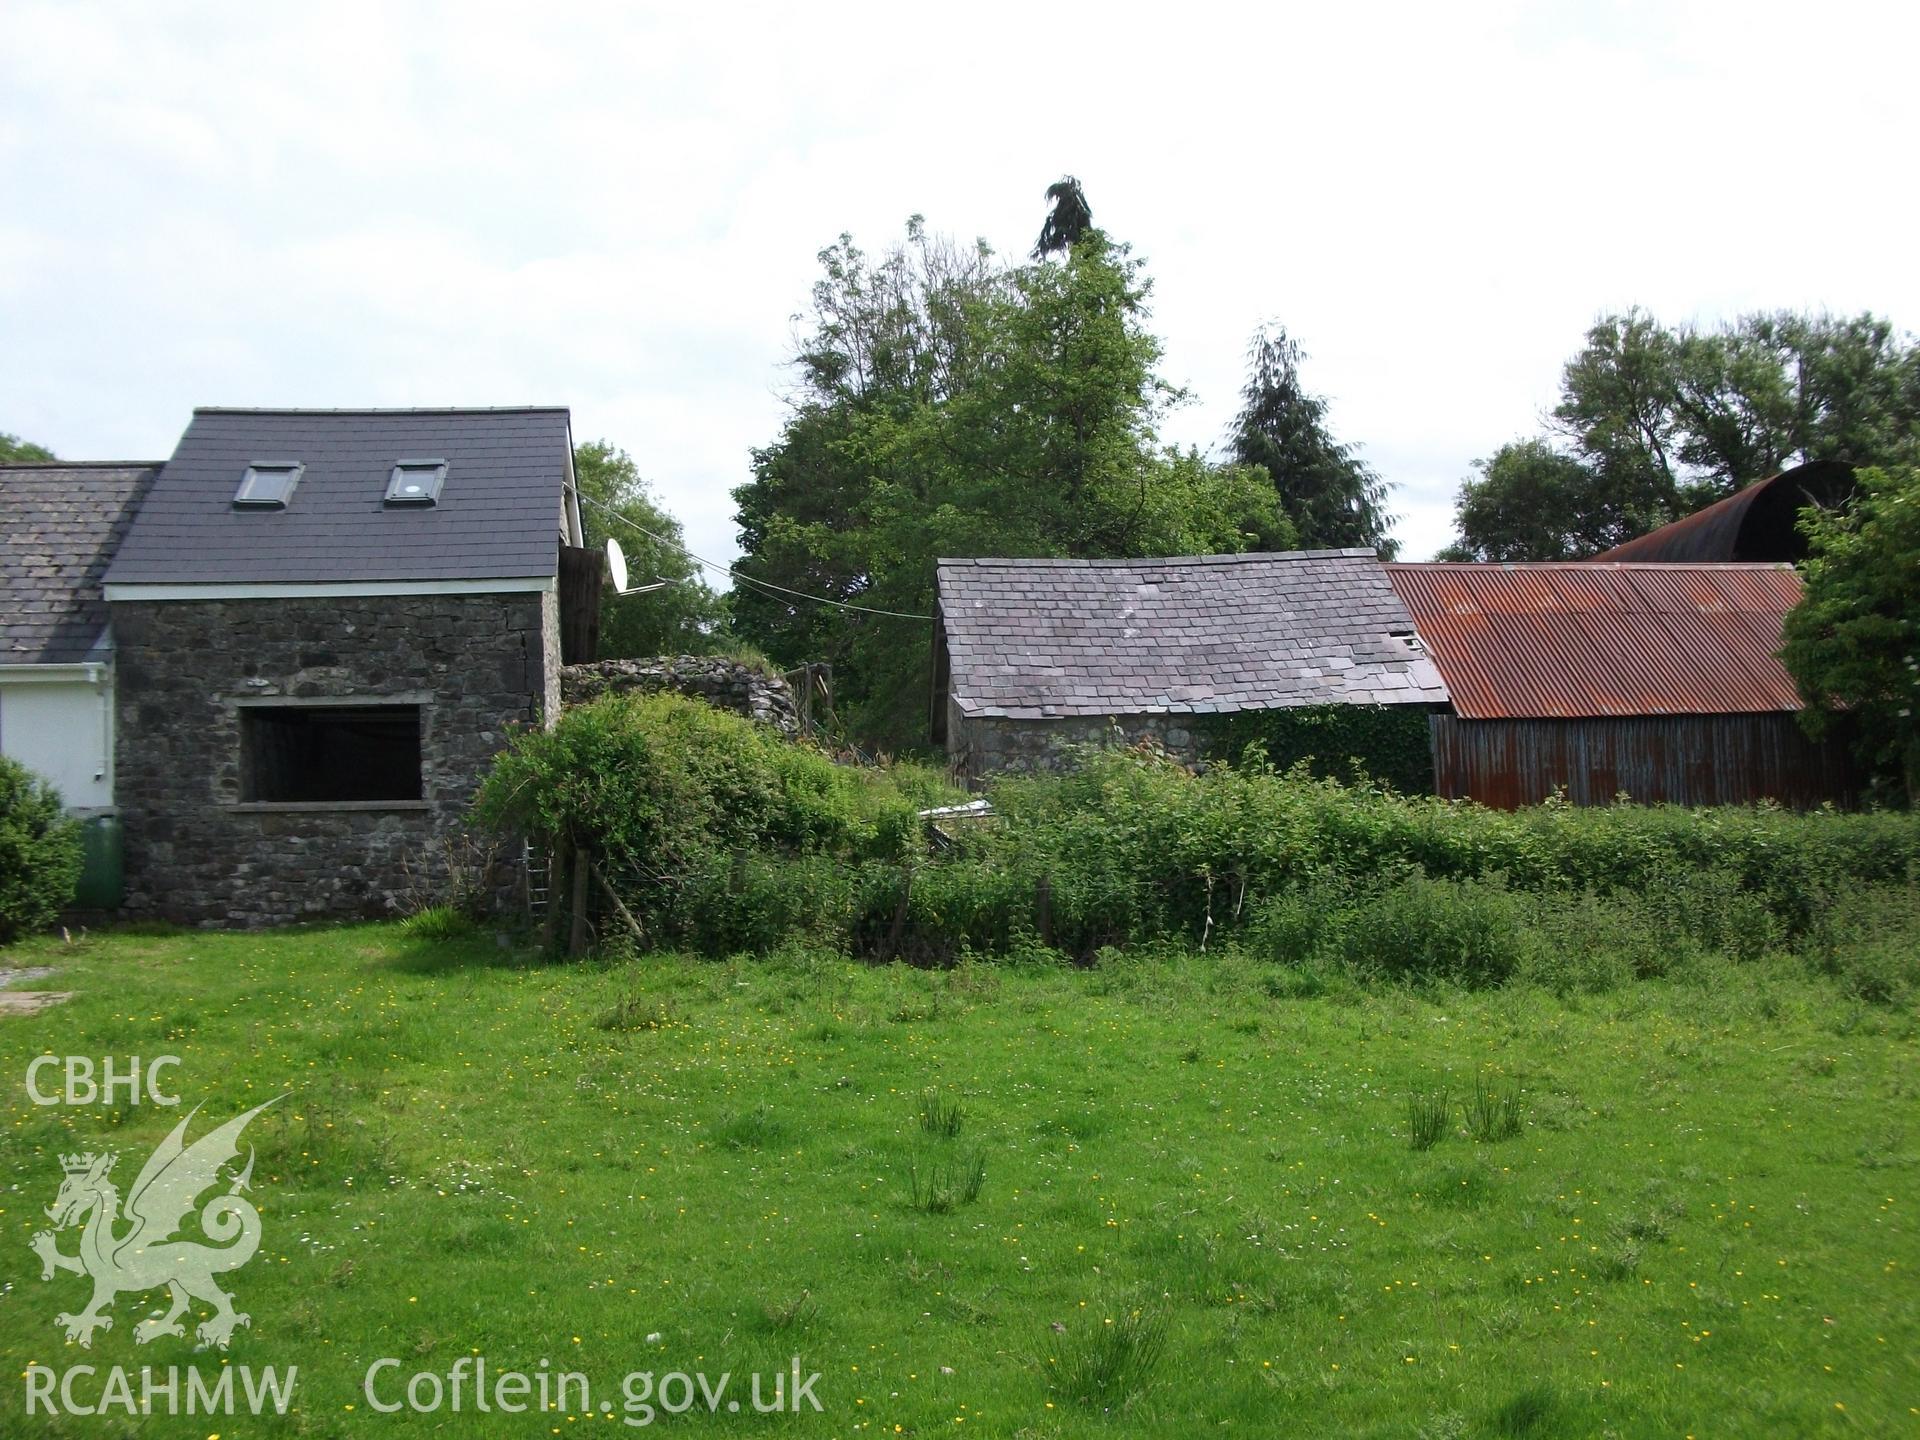 Photograph showing rear of building attached to the cottage and rear of building adjacent to the cottage at Pant-y-Castell, Maesybont. Photographed by Mark Waghorn to meet a condition attached to planning application.